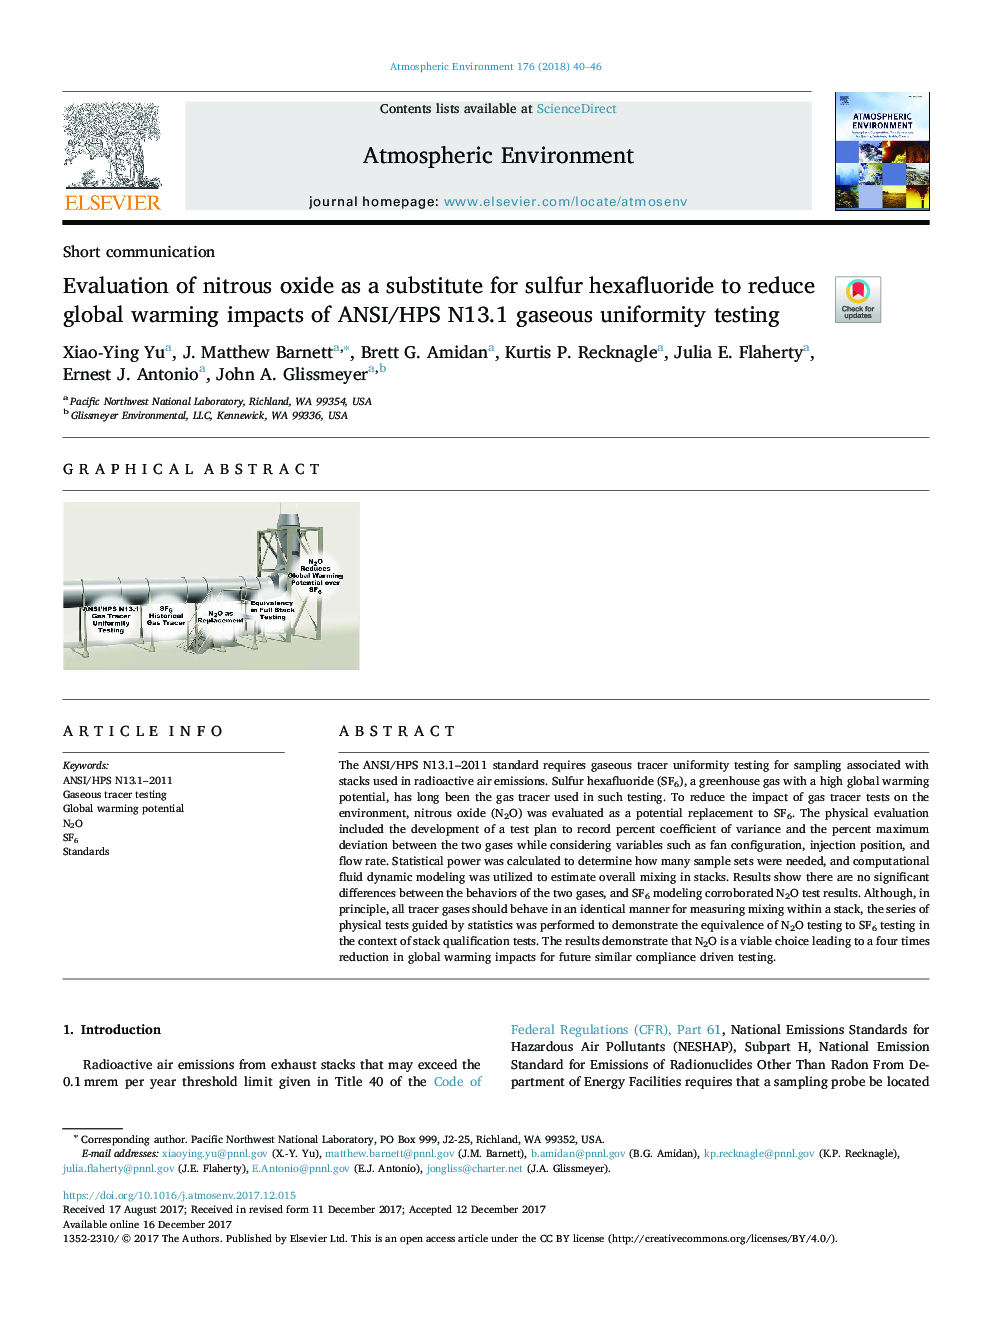 Evaluation of nitrous oxide as a substitute for sulfur hexafluoride to reduce global warming impacts of ANSI/HPS N13.1 gaseous uniformity testing